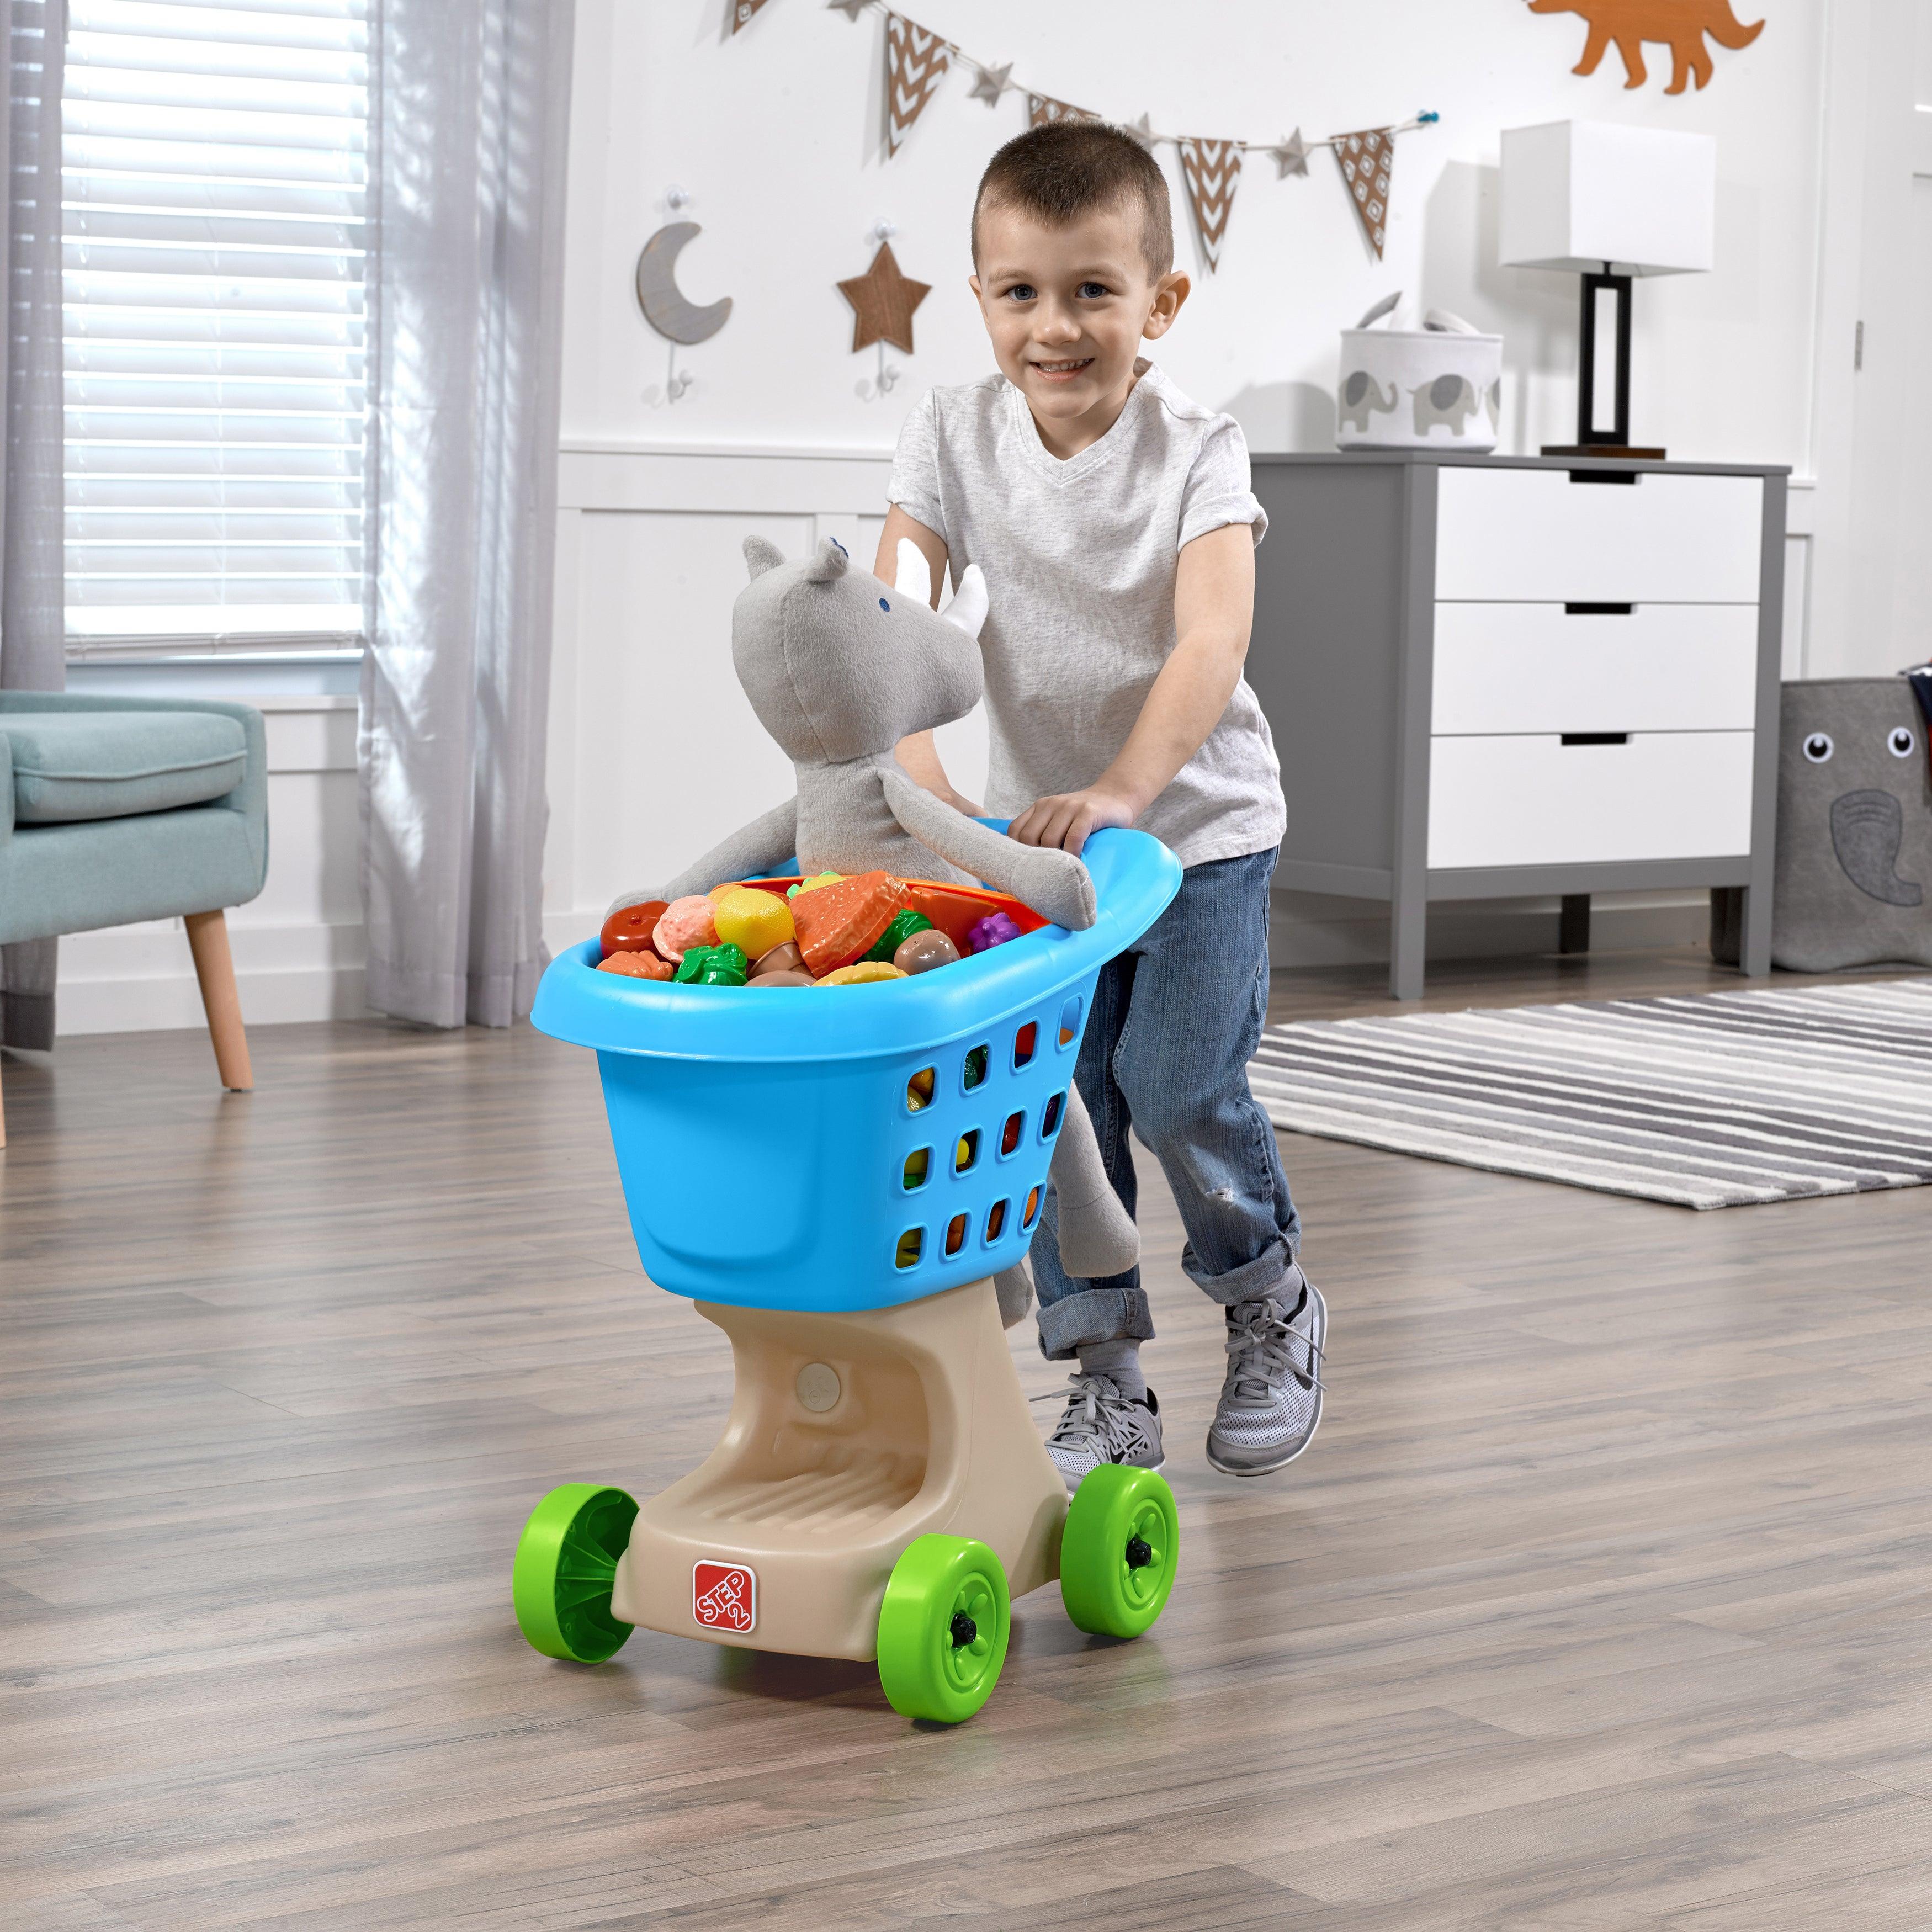 Step2 Little Helper's Shopping Cart for Kids, Blue - FunCorp India